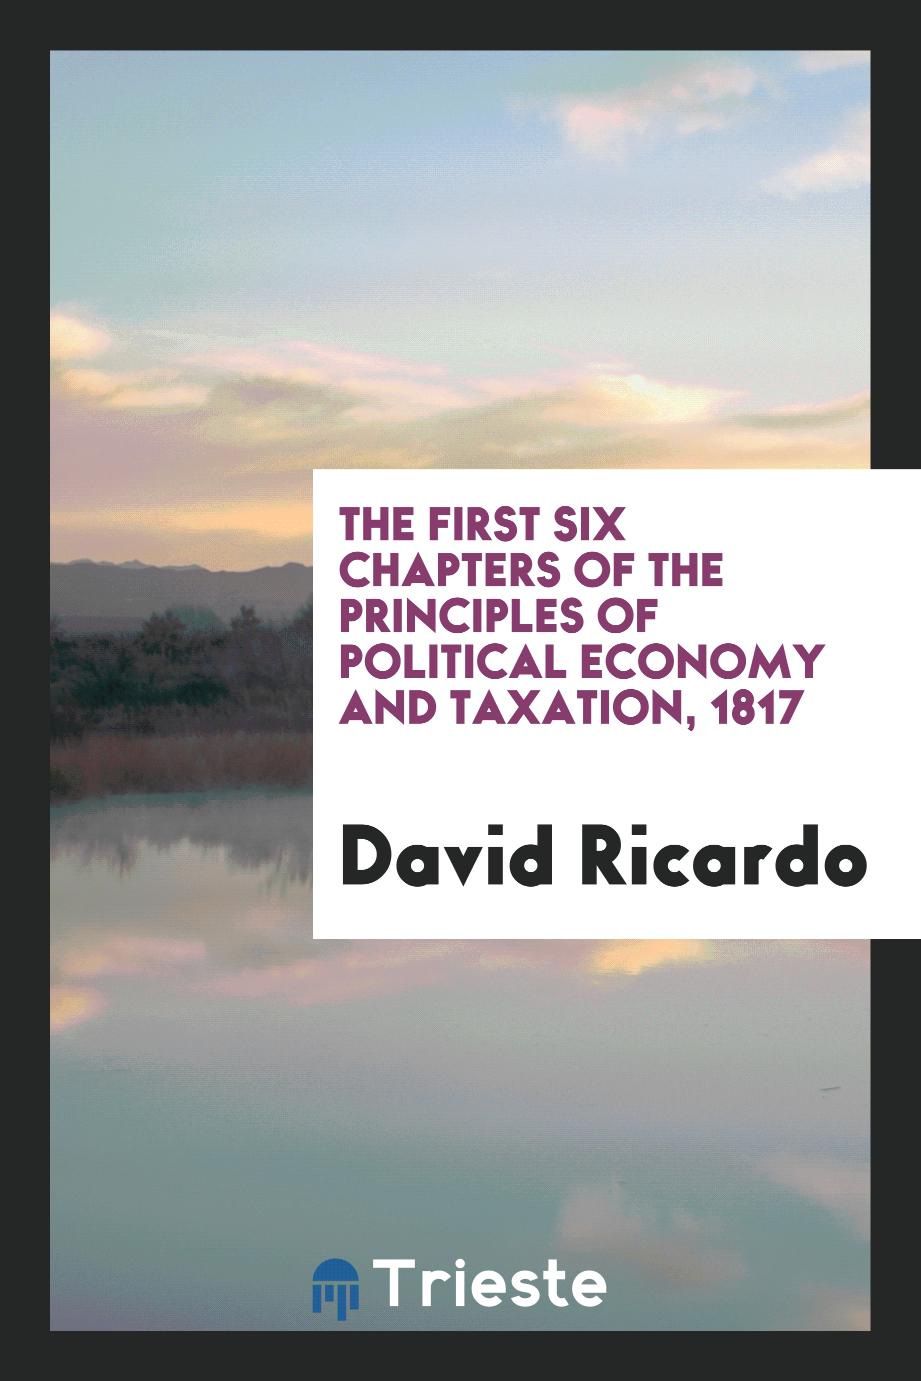 The First Six Chapters of the Principles of Political Economy and Taxation, 1817